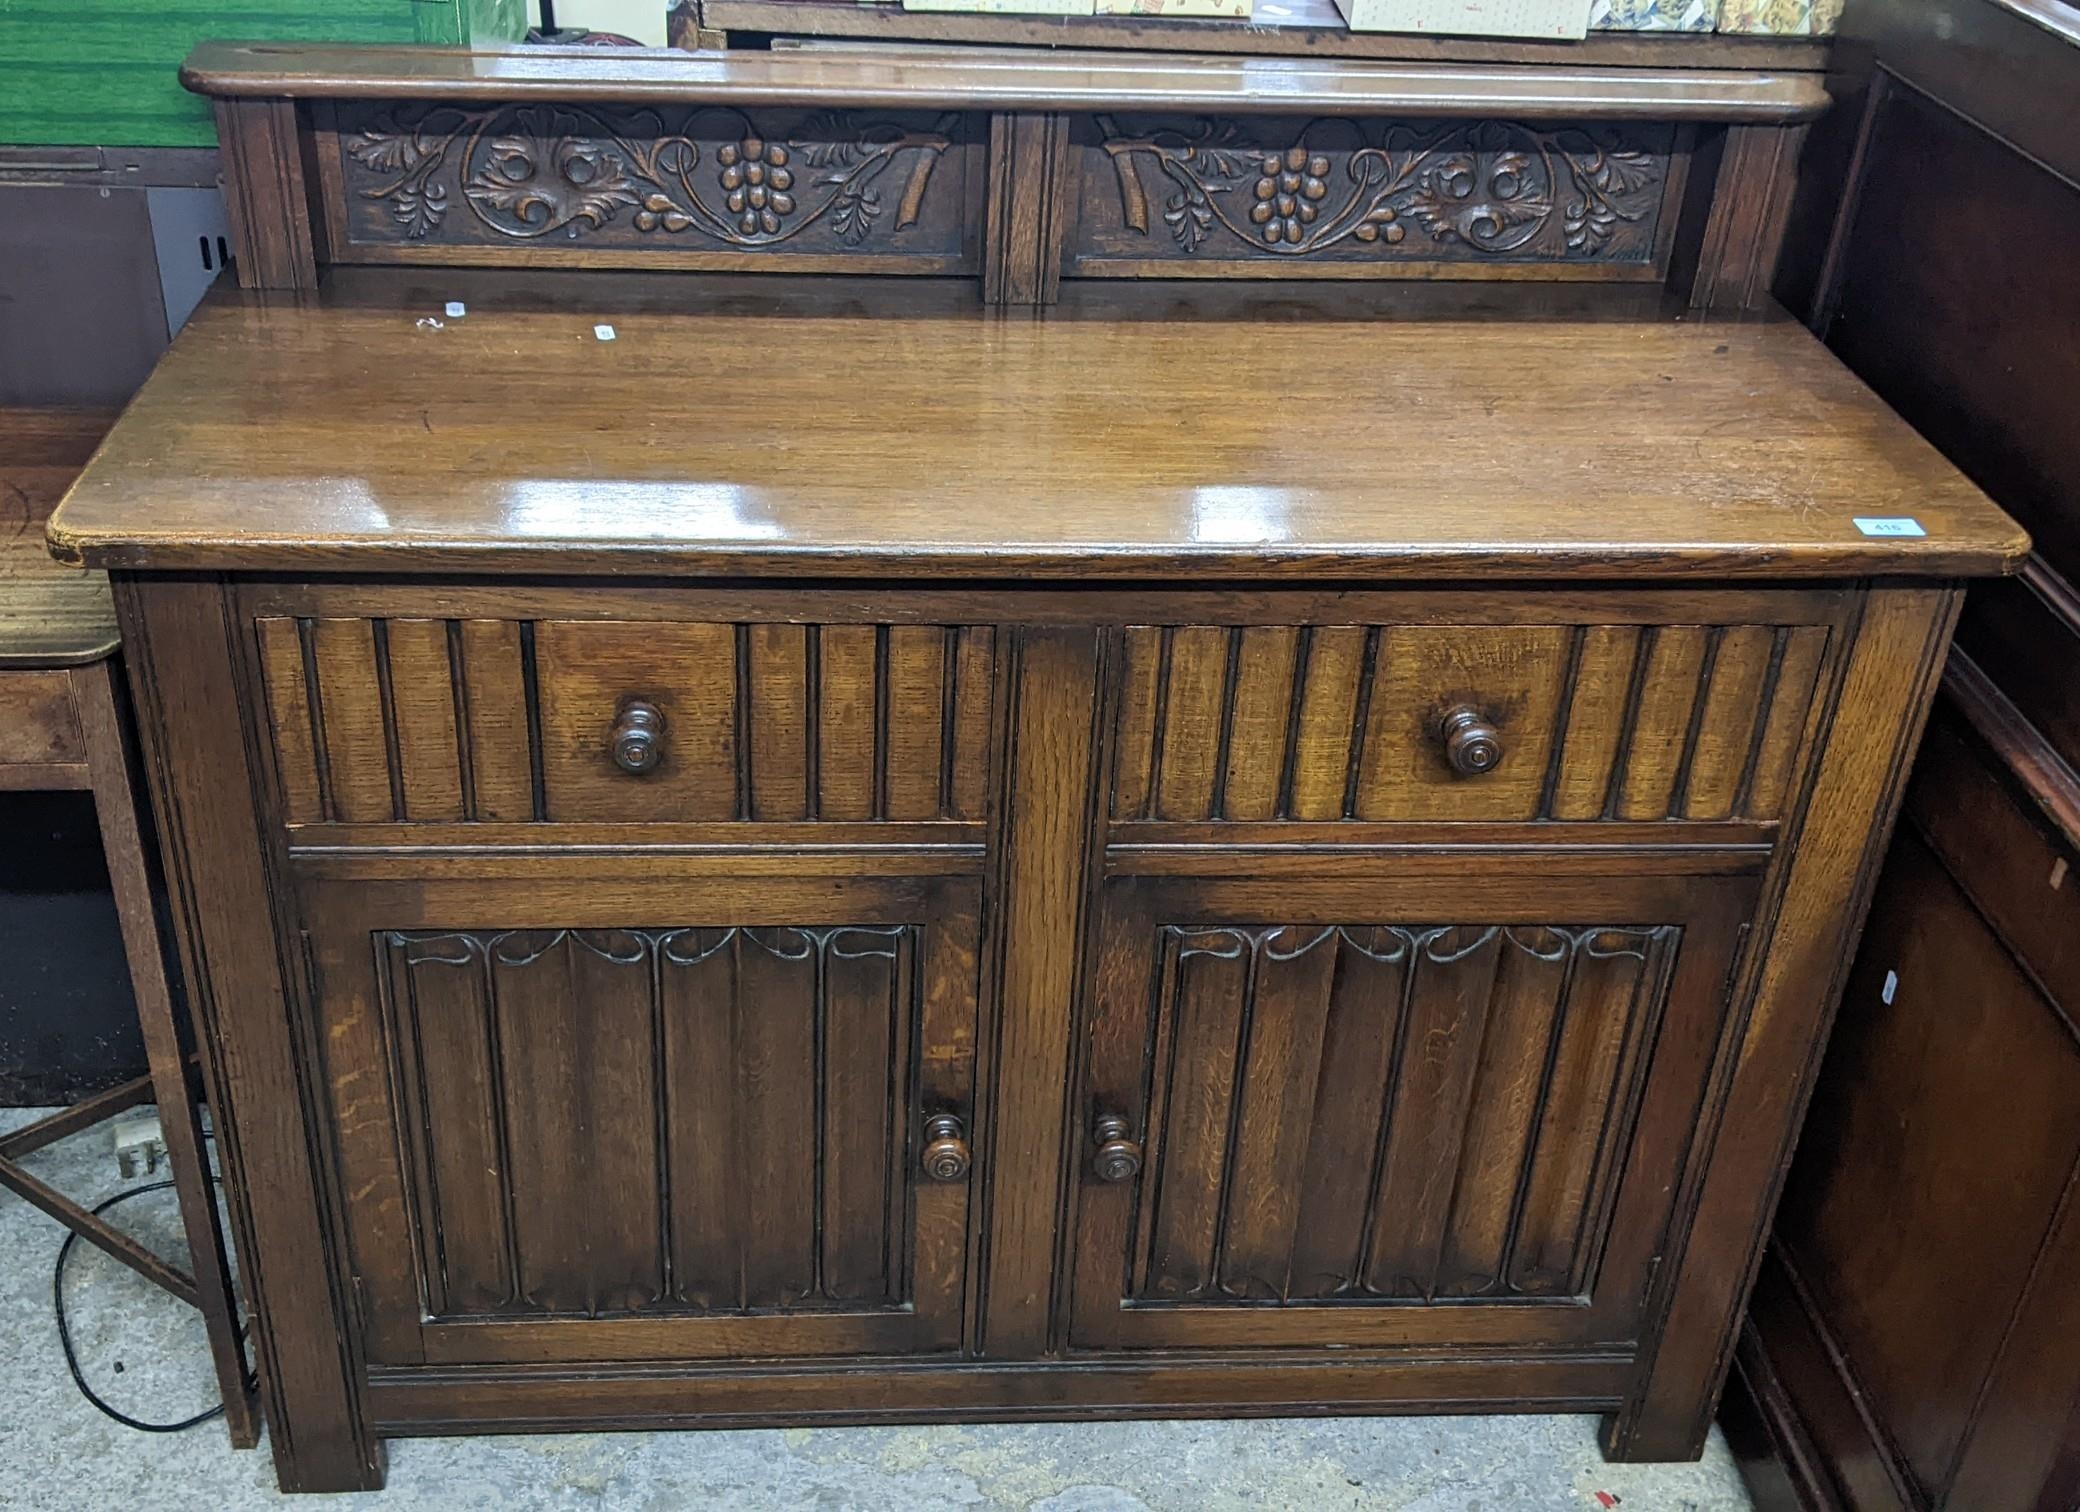 An early to mid oak linenfold sideboard, extended back with two panels of grape and vine leaf carved